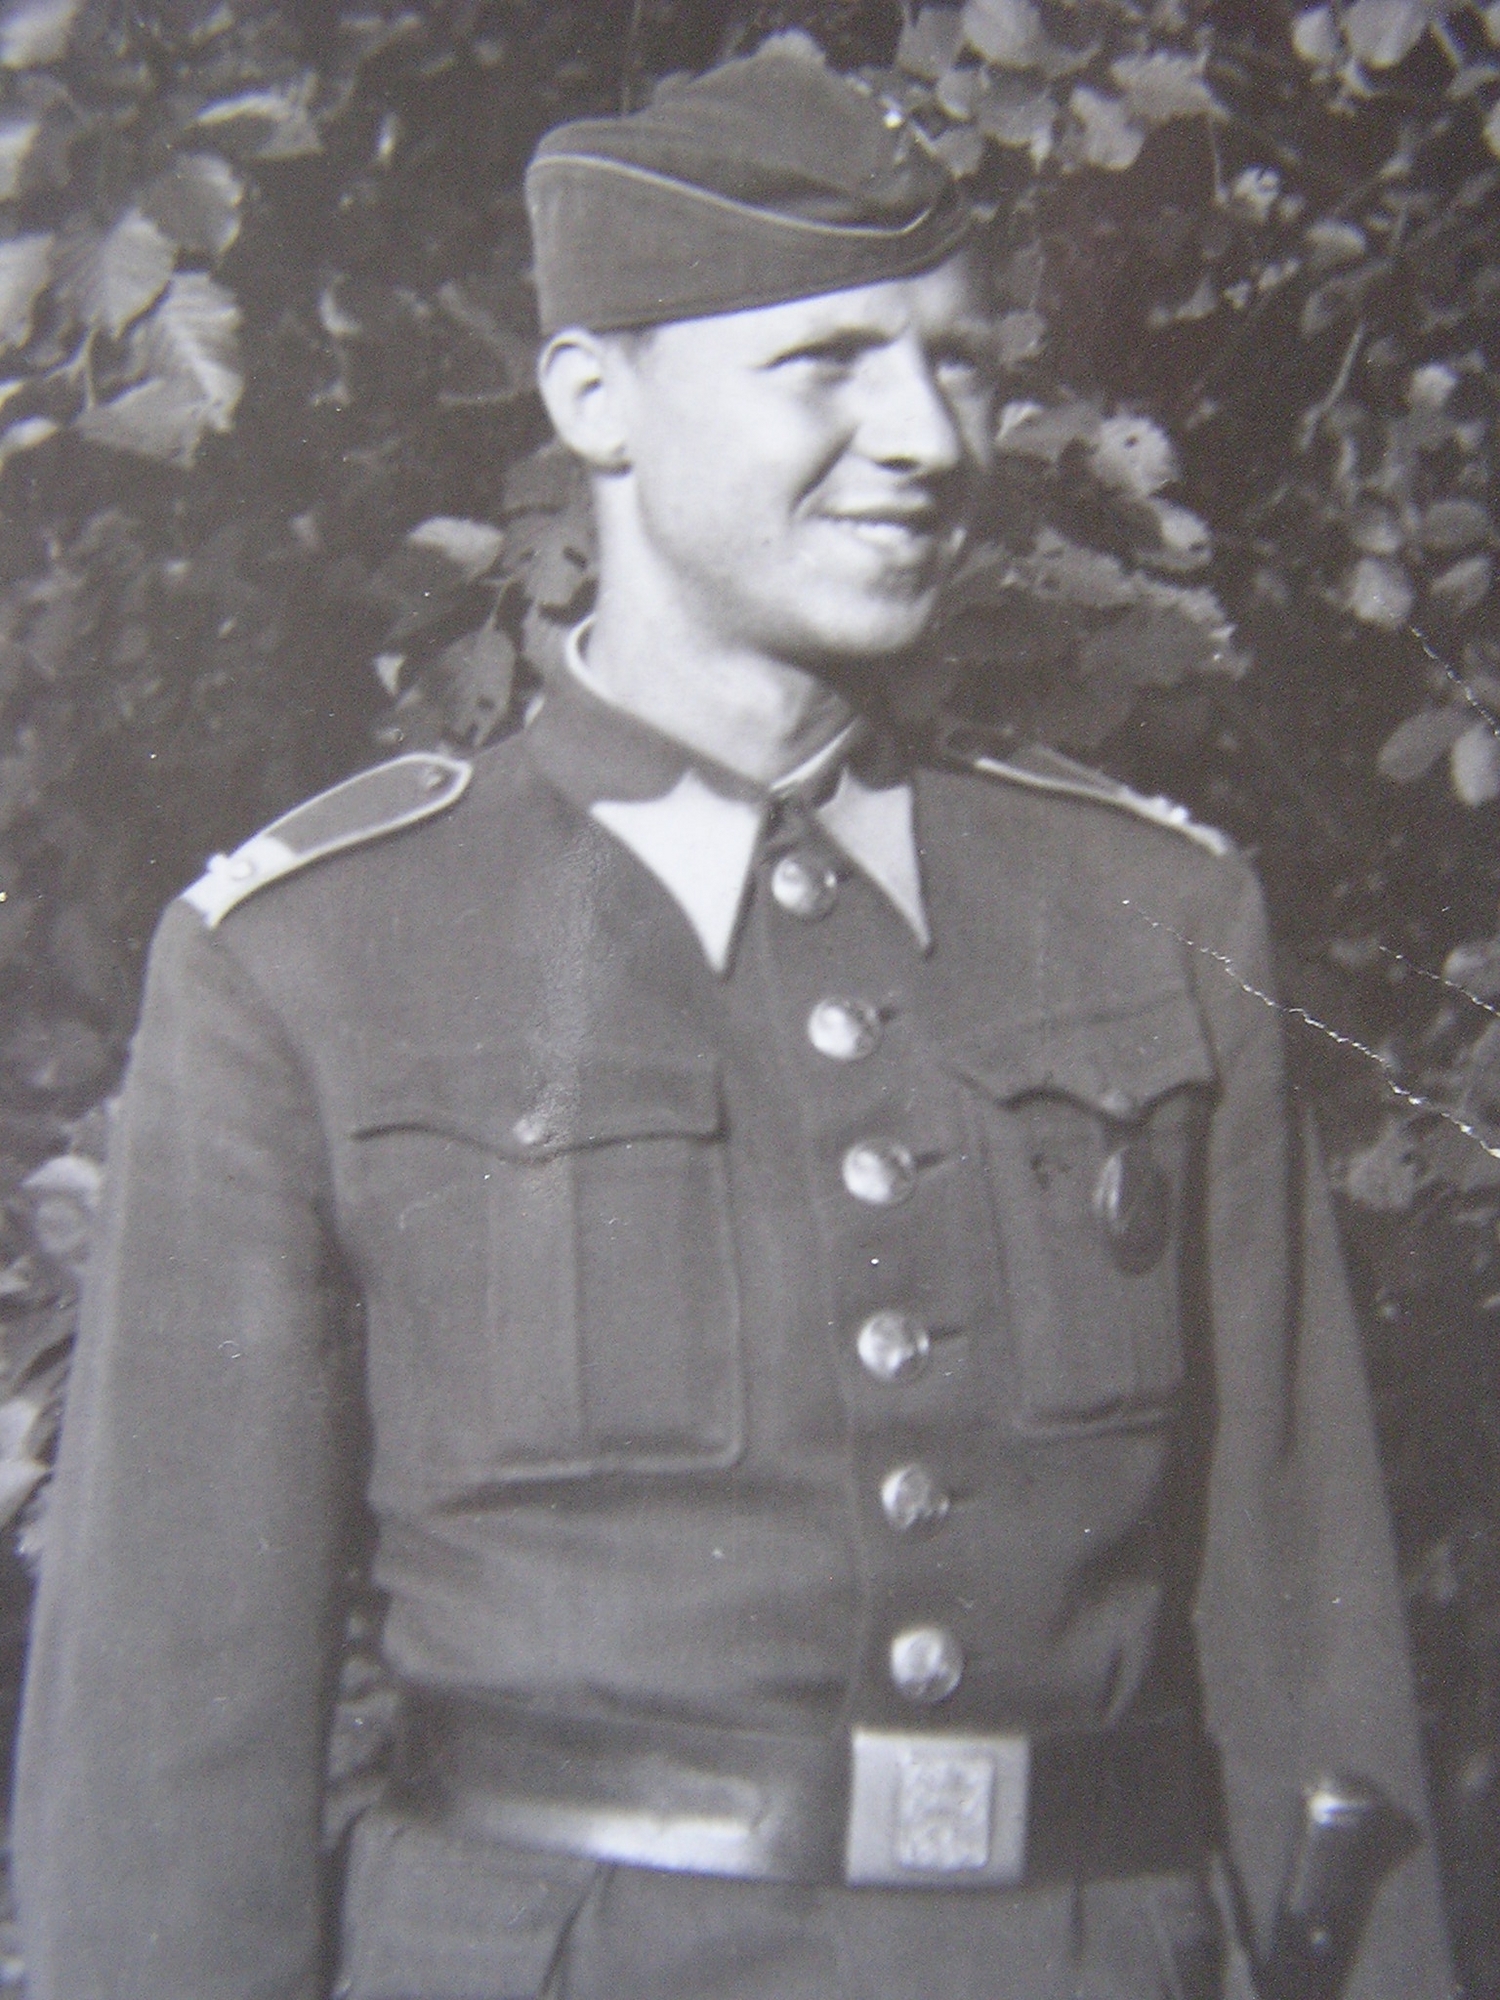 During military service